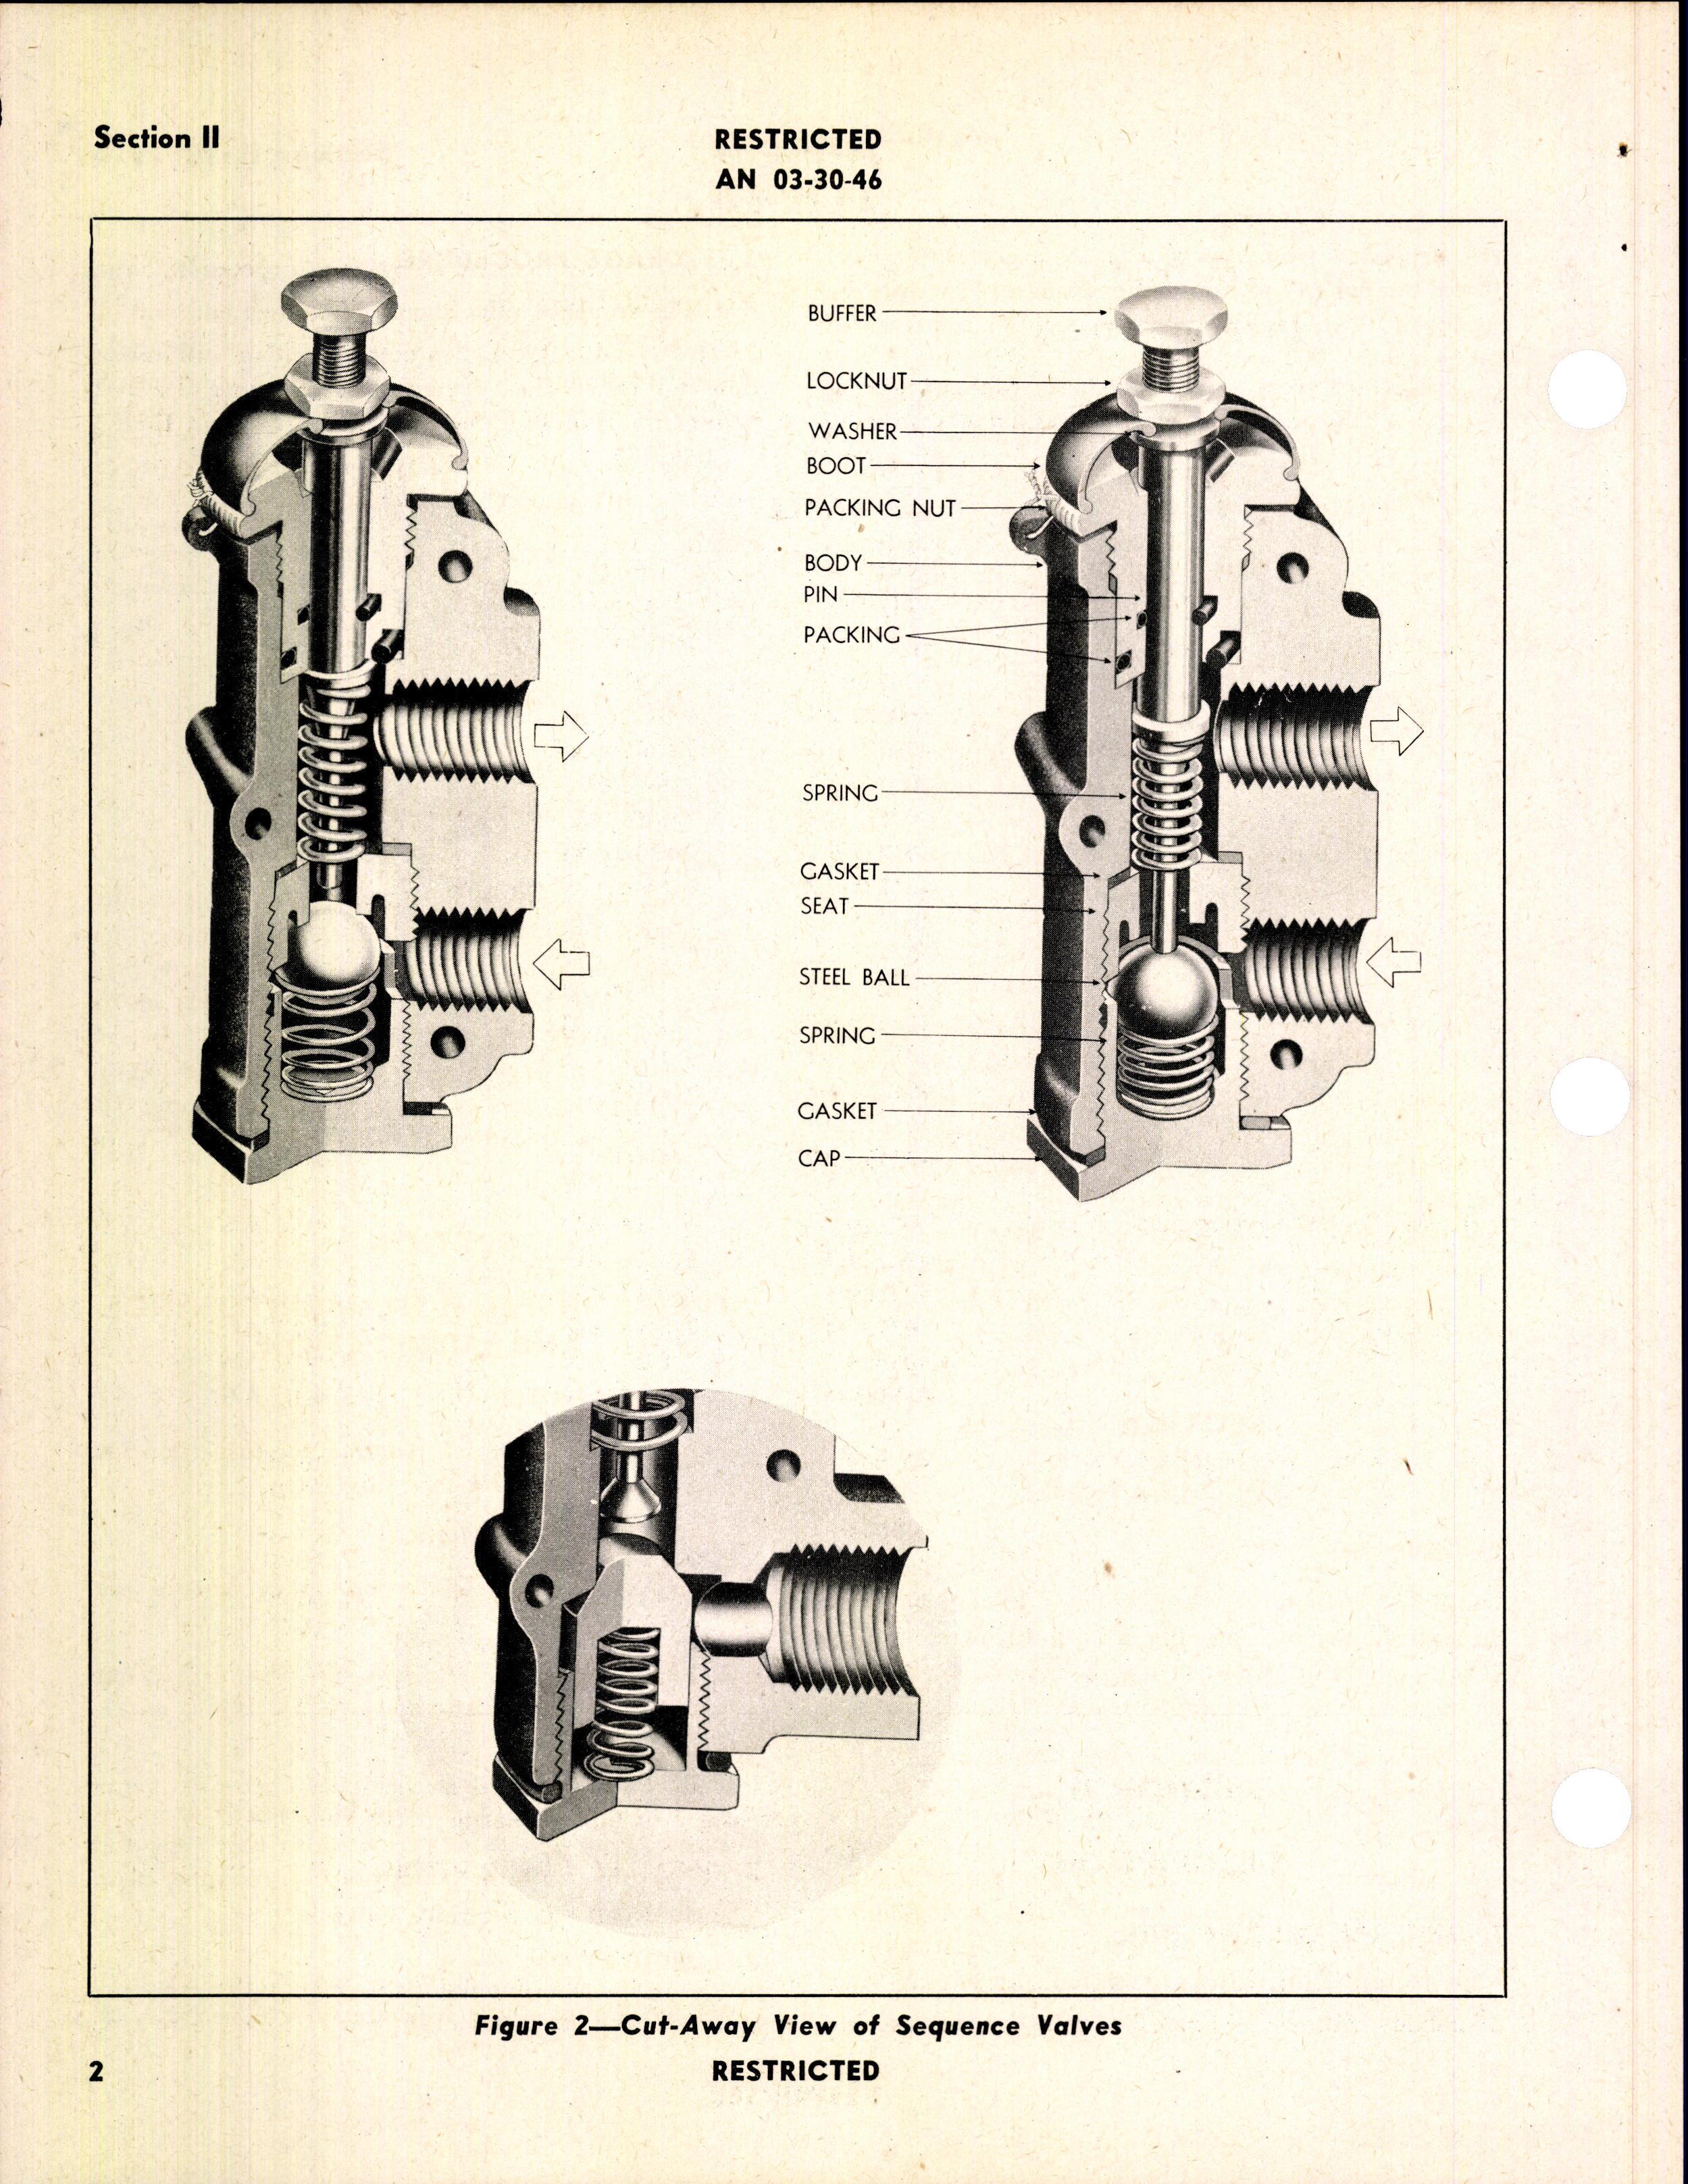 Sample page 6 from AirCorps Library document: Handbook of Instructions with Parts Catalog for Hydraulic Sequence Valves